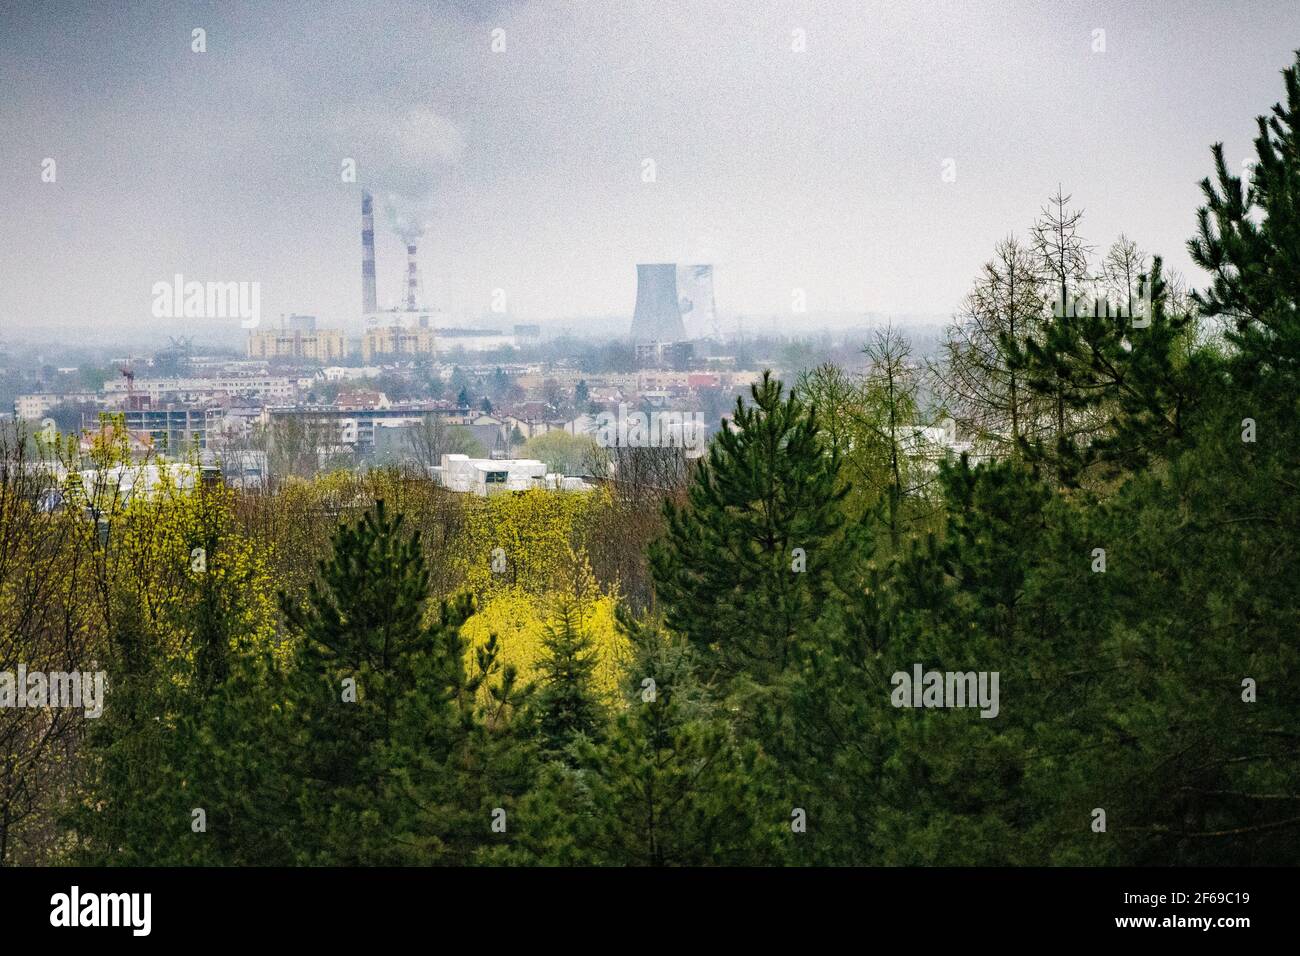 Industrial part of city of Krakow, Poland with power plants and factory chimneys, fir trees, Environmental concept, pollution Stock Photo